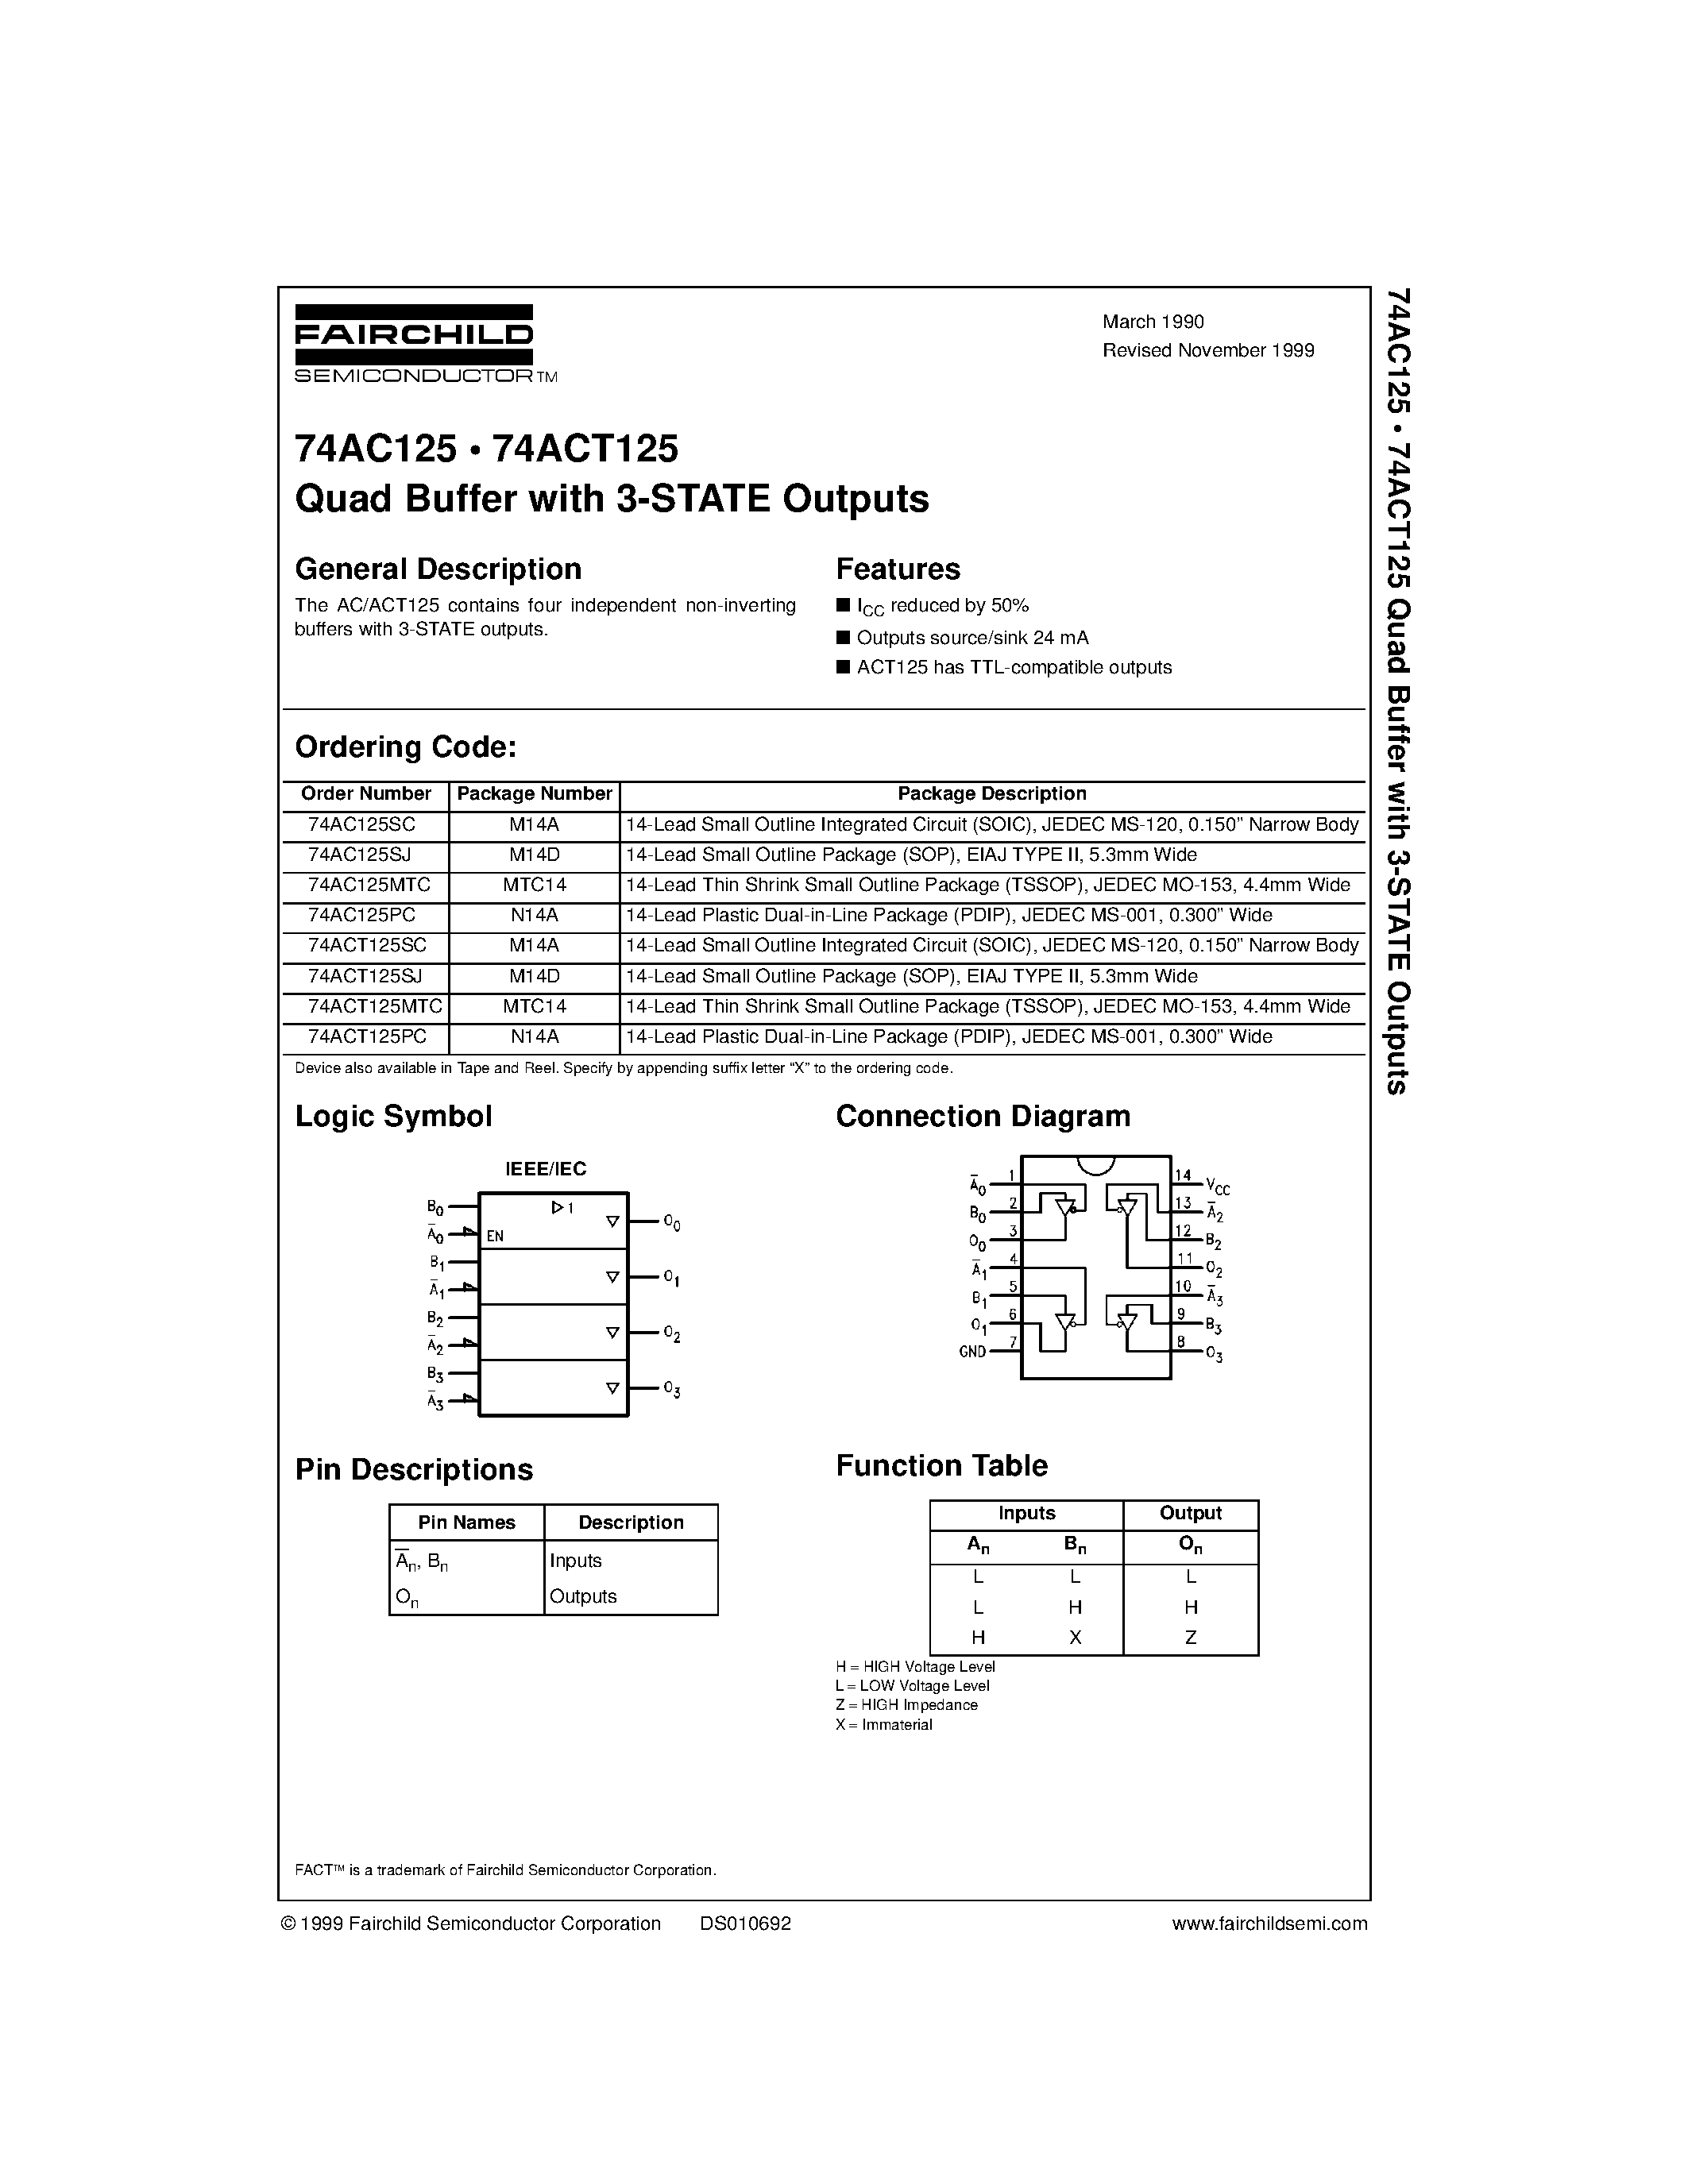 Datasheet 74AC125SC - Quad Buffer with 3-STATE Outputs page 1